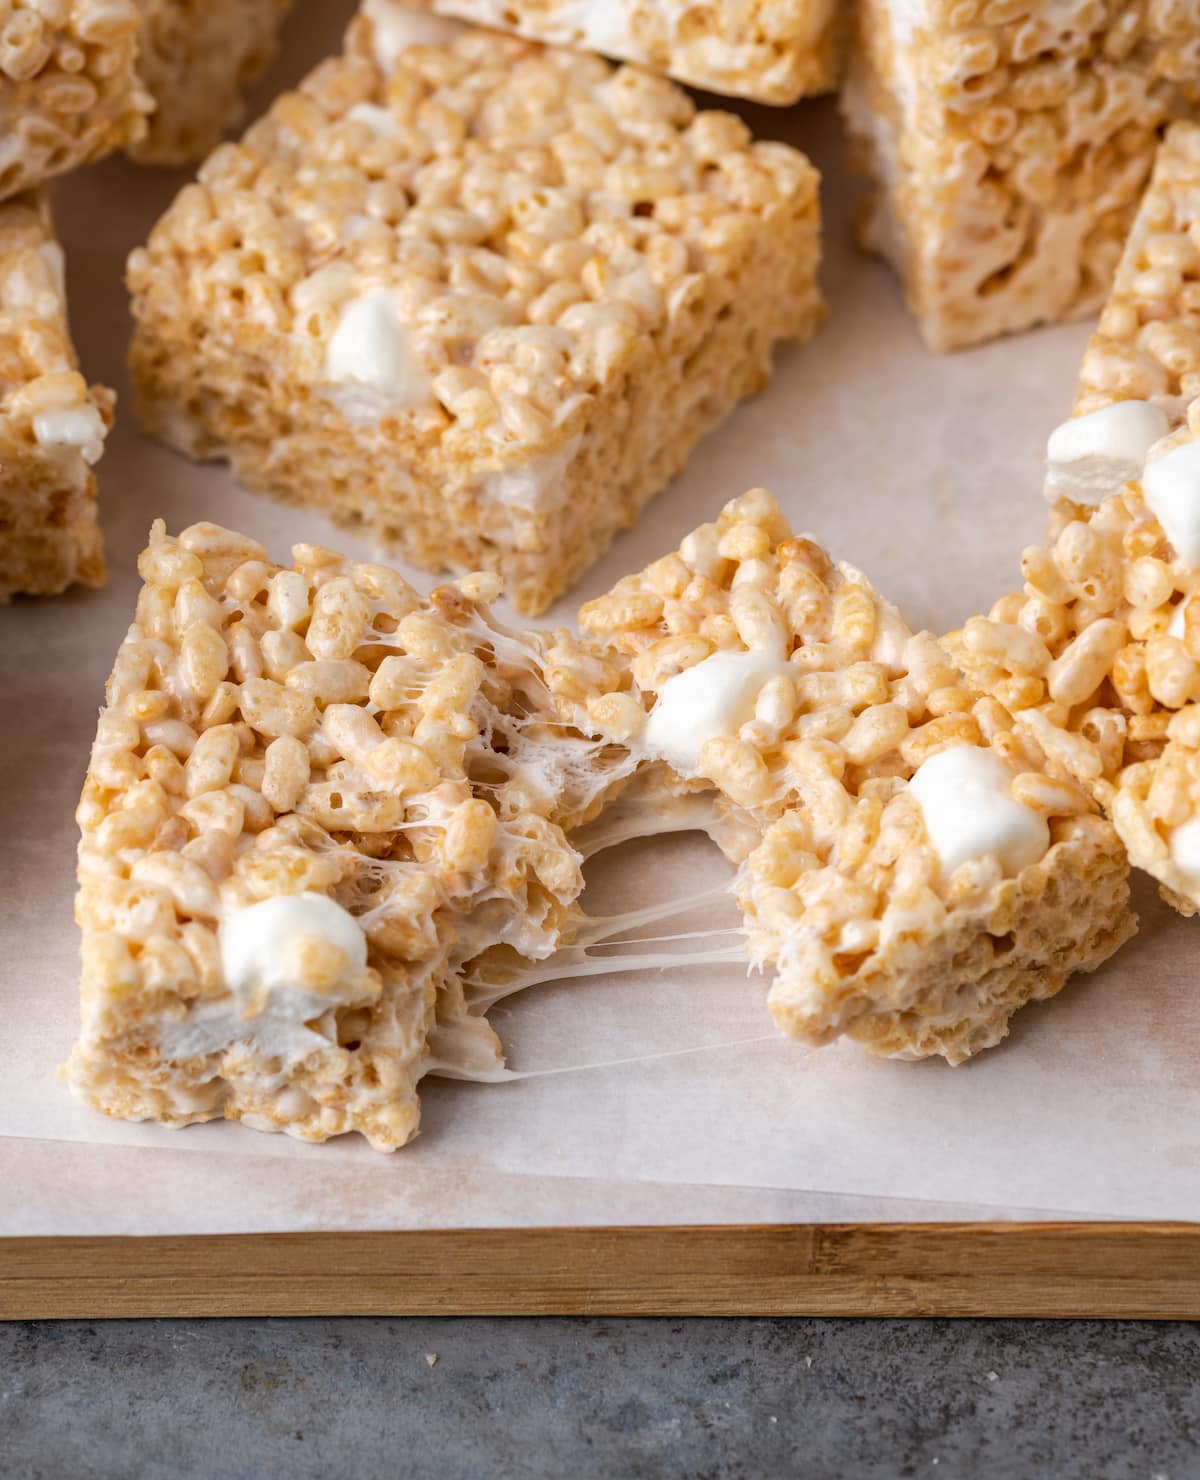 A Perfect Rice Krispie Treat pulled in two, on a wooden platter lined with parchment paper.